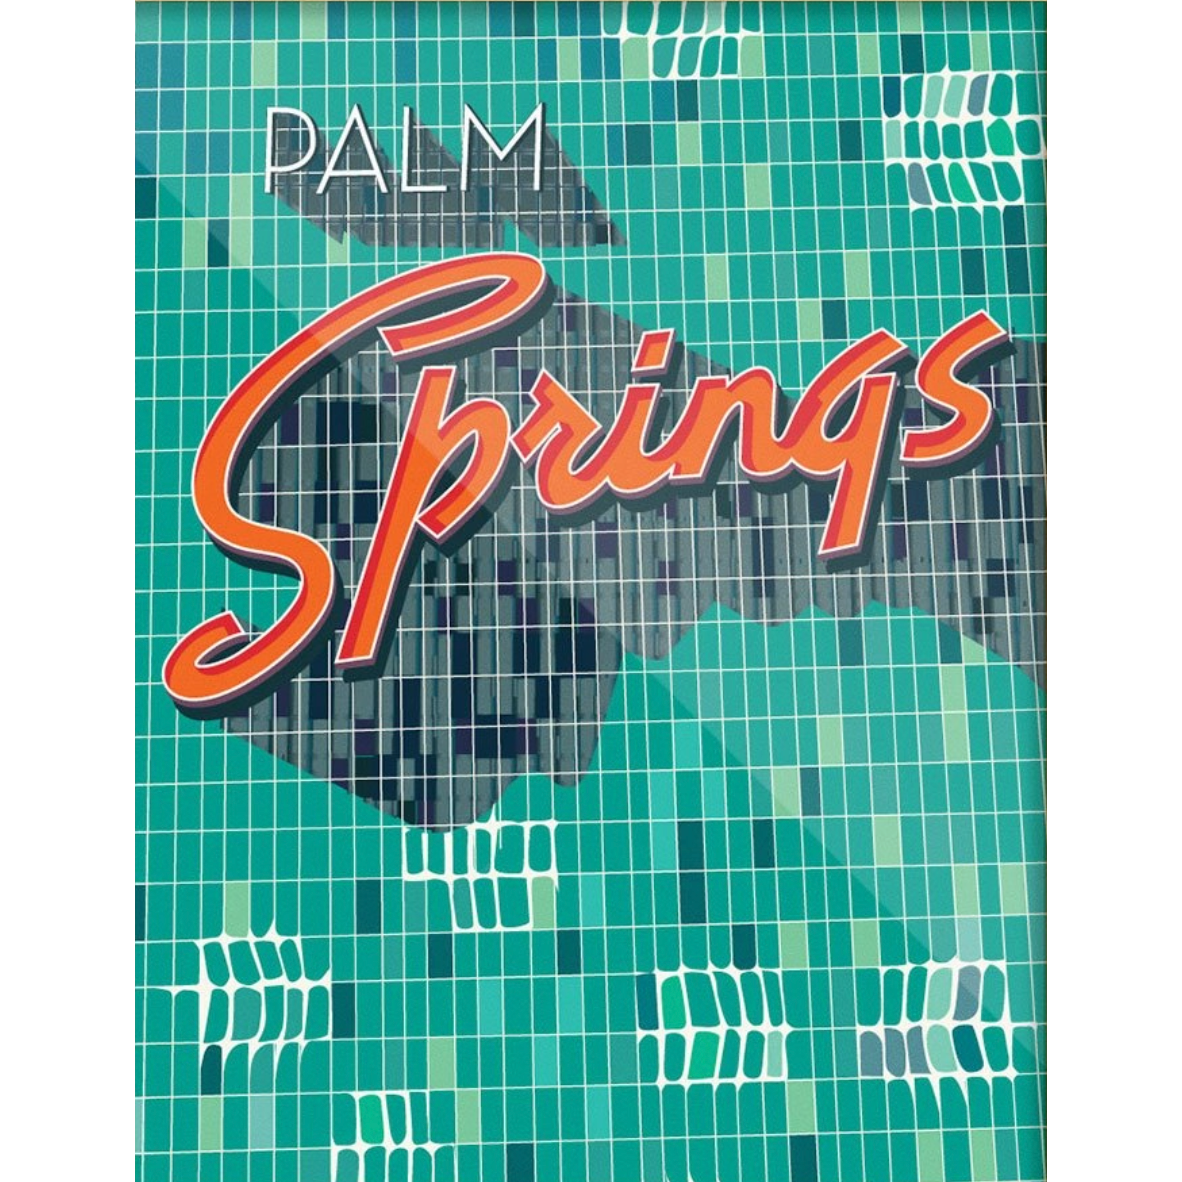 Palm Springs Sign Greeting Card